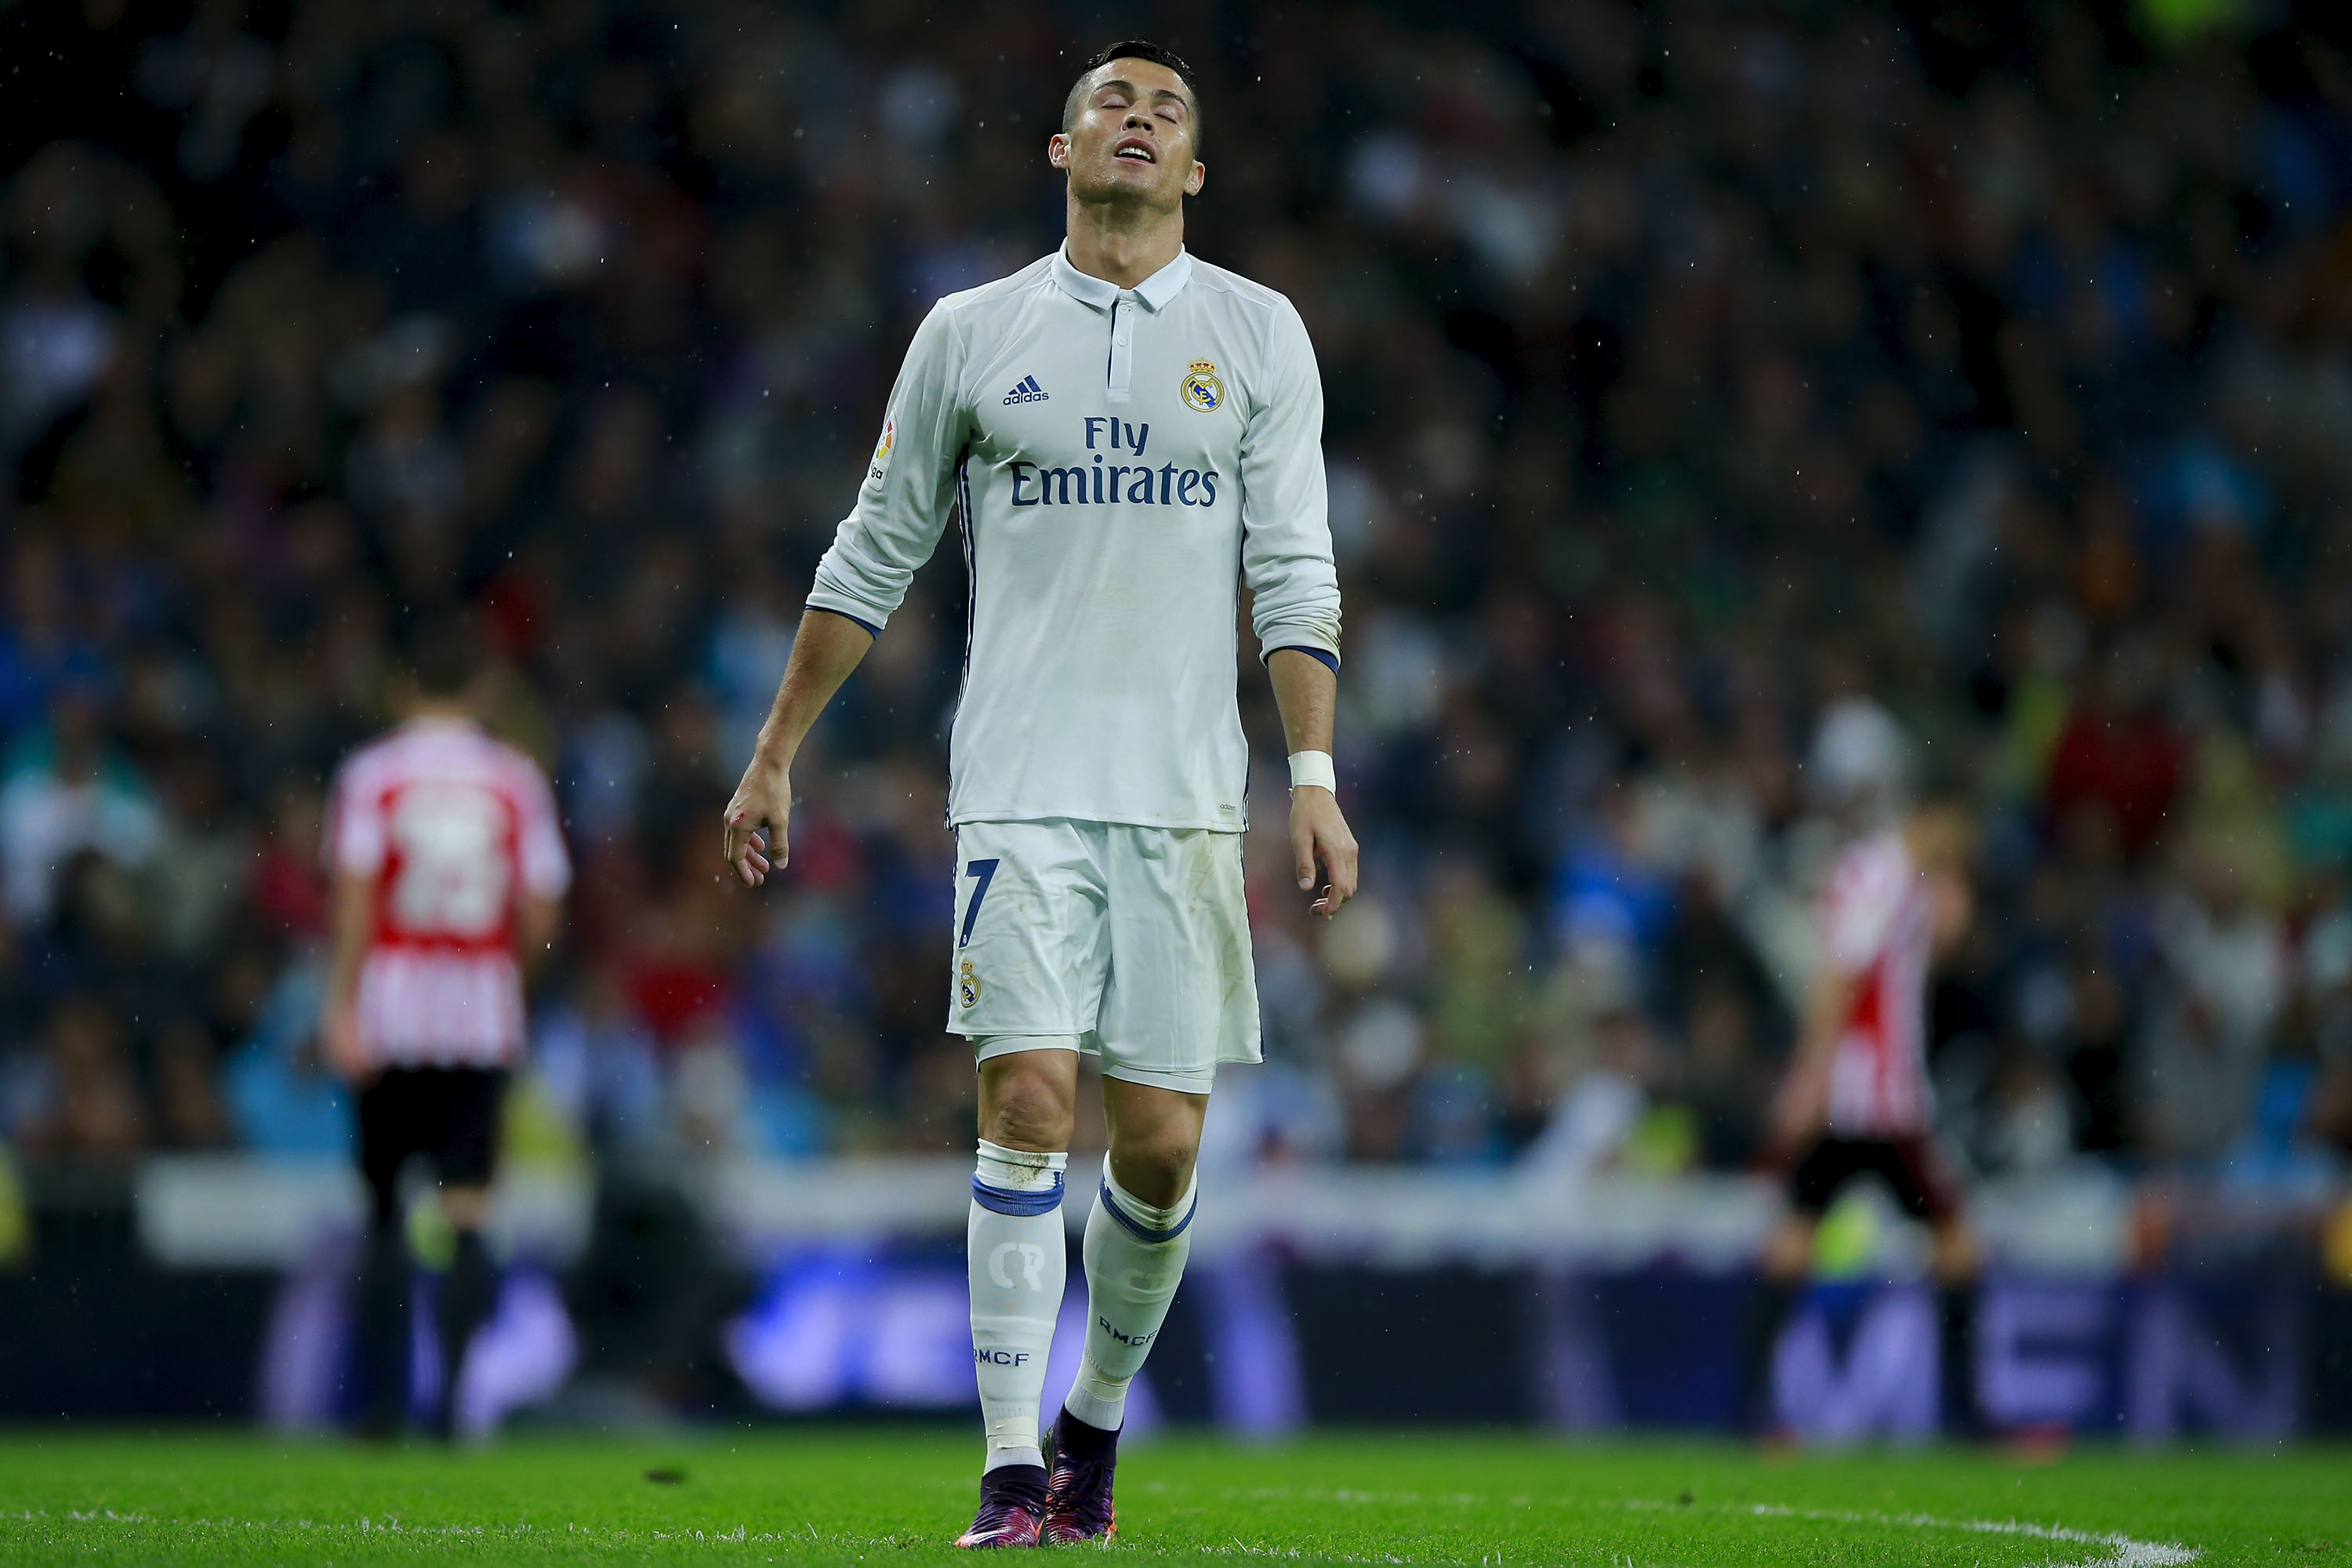 MADRID, SPAIN - OCTOBER 23: Cristiano Ronaldo of Real Madrid CF reacts as he fail to score during the La Liga match between Real Madrid CF and Athletic Club de Bilbao at Estadio Santiago Bernabeu on October 23, 2016 in Madrid, Spain. (Photo by Gonzalo Arroyo Moreno/Getty Images)